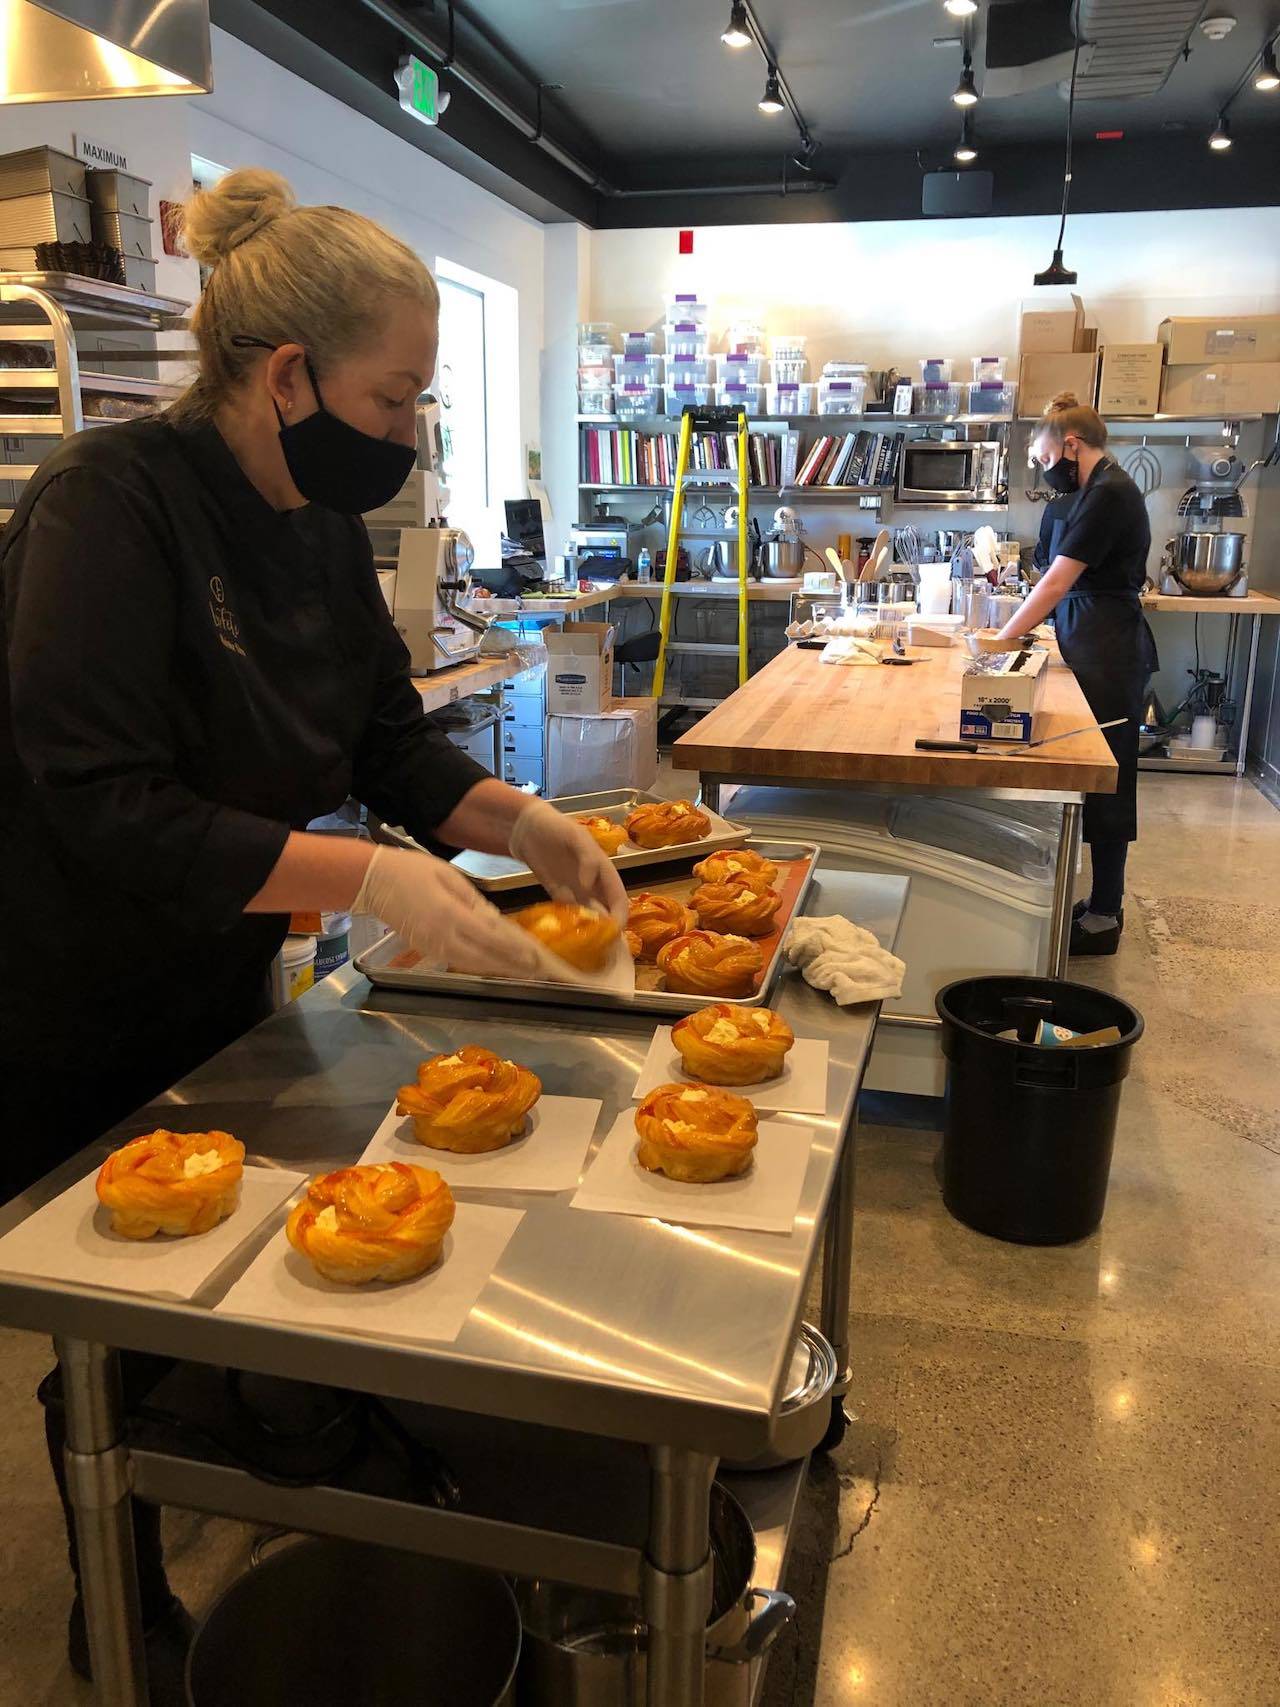 A behind-the-scenes look at the bakery. Photo courtesy La Fête Pâtisserie Française